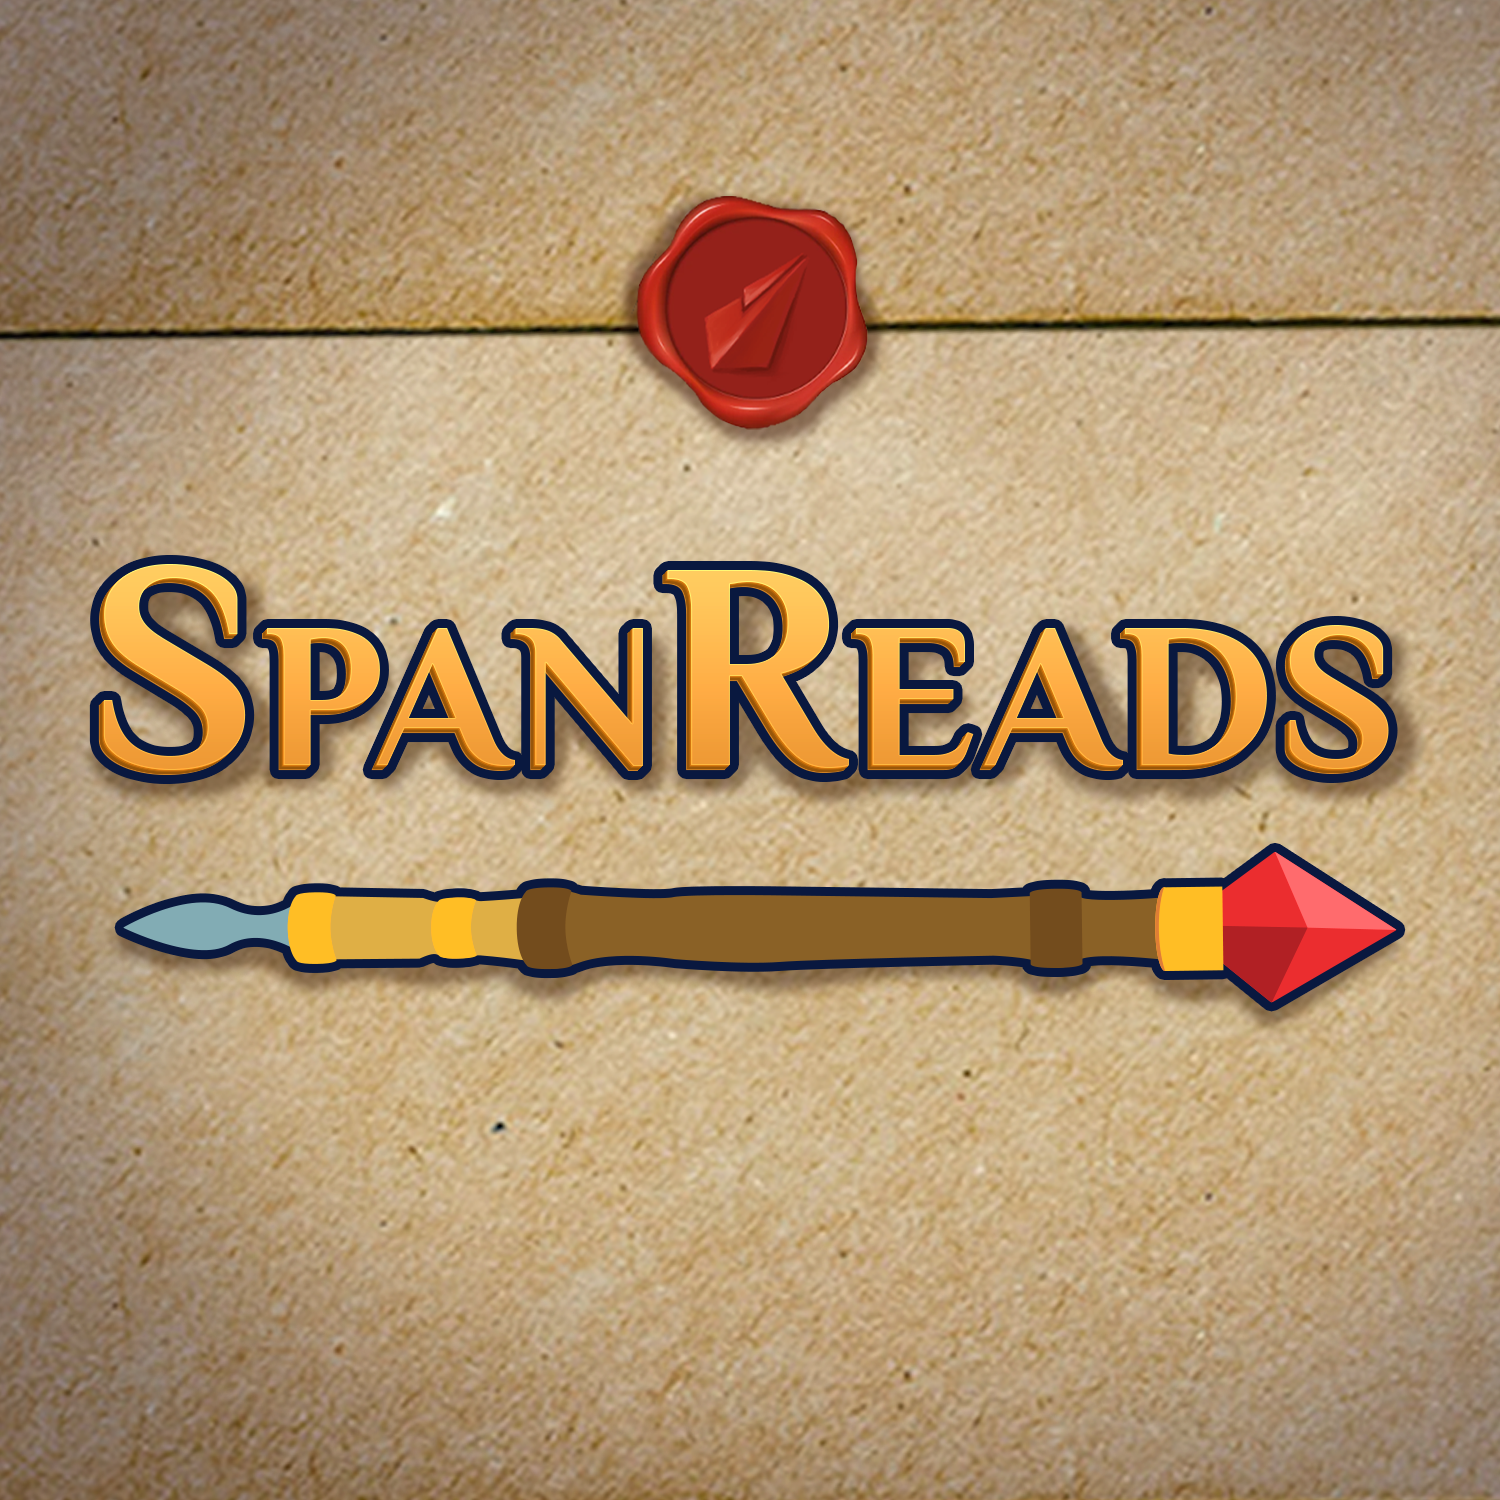 More information about "SpanReads: Starsight - Characters & Relationships"